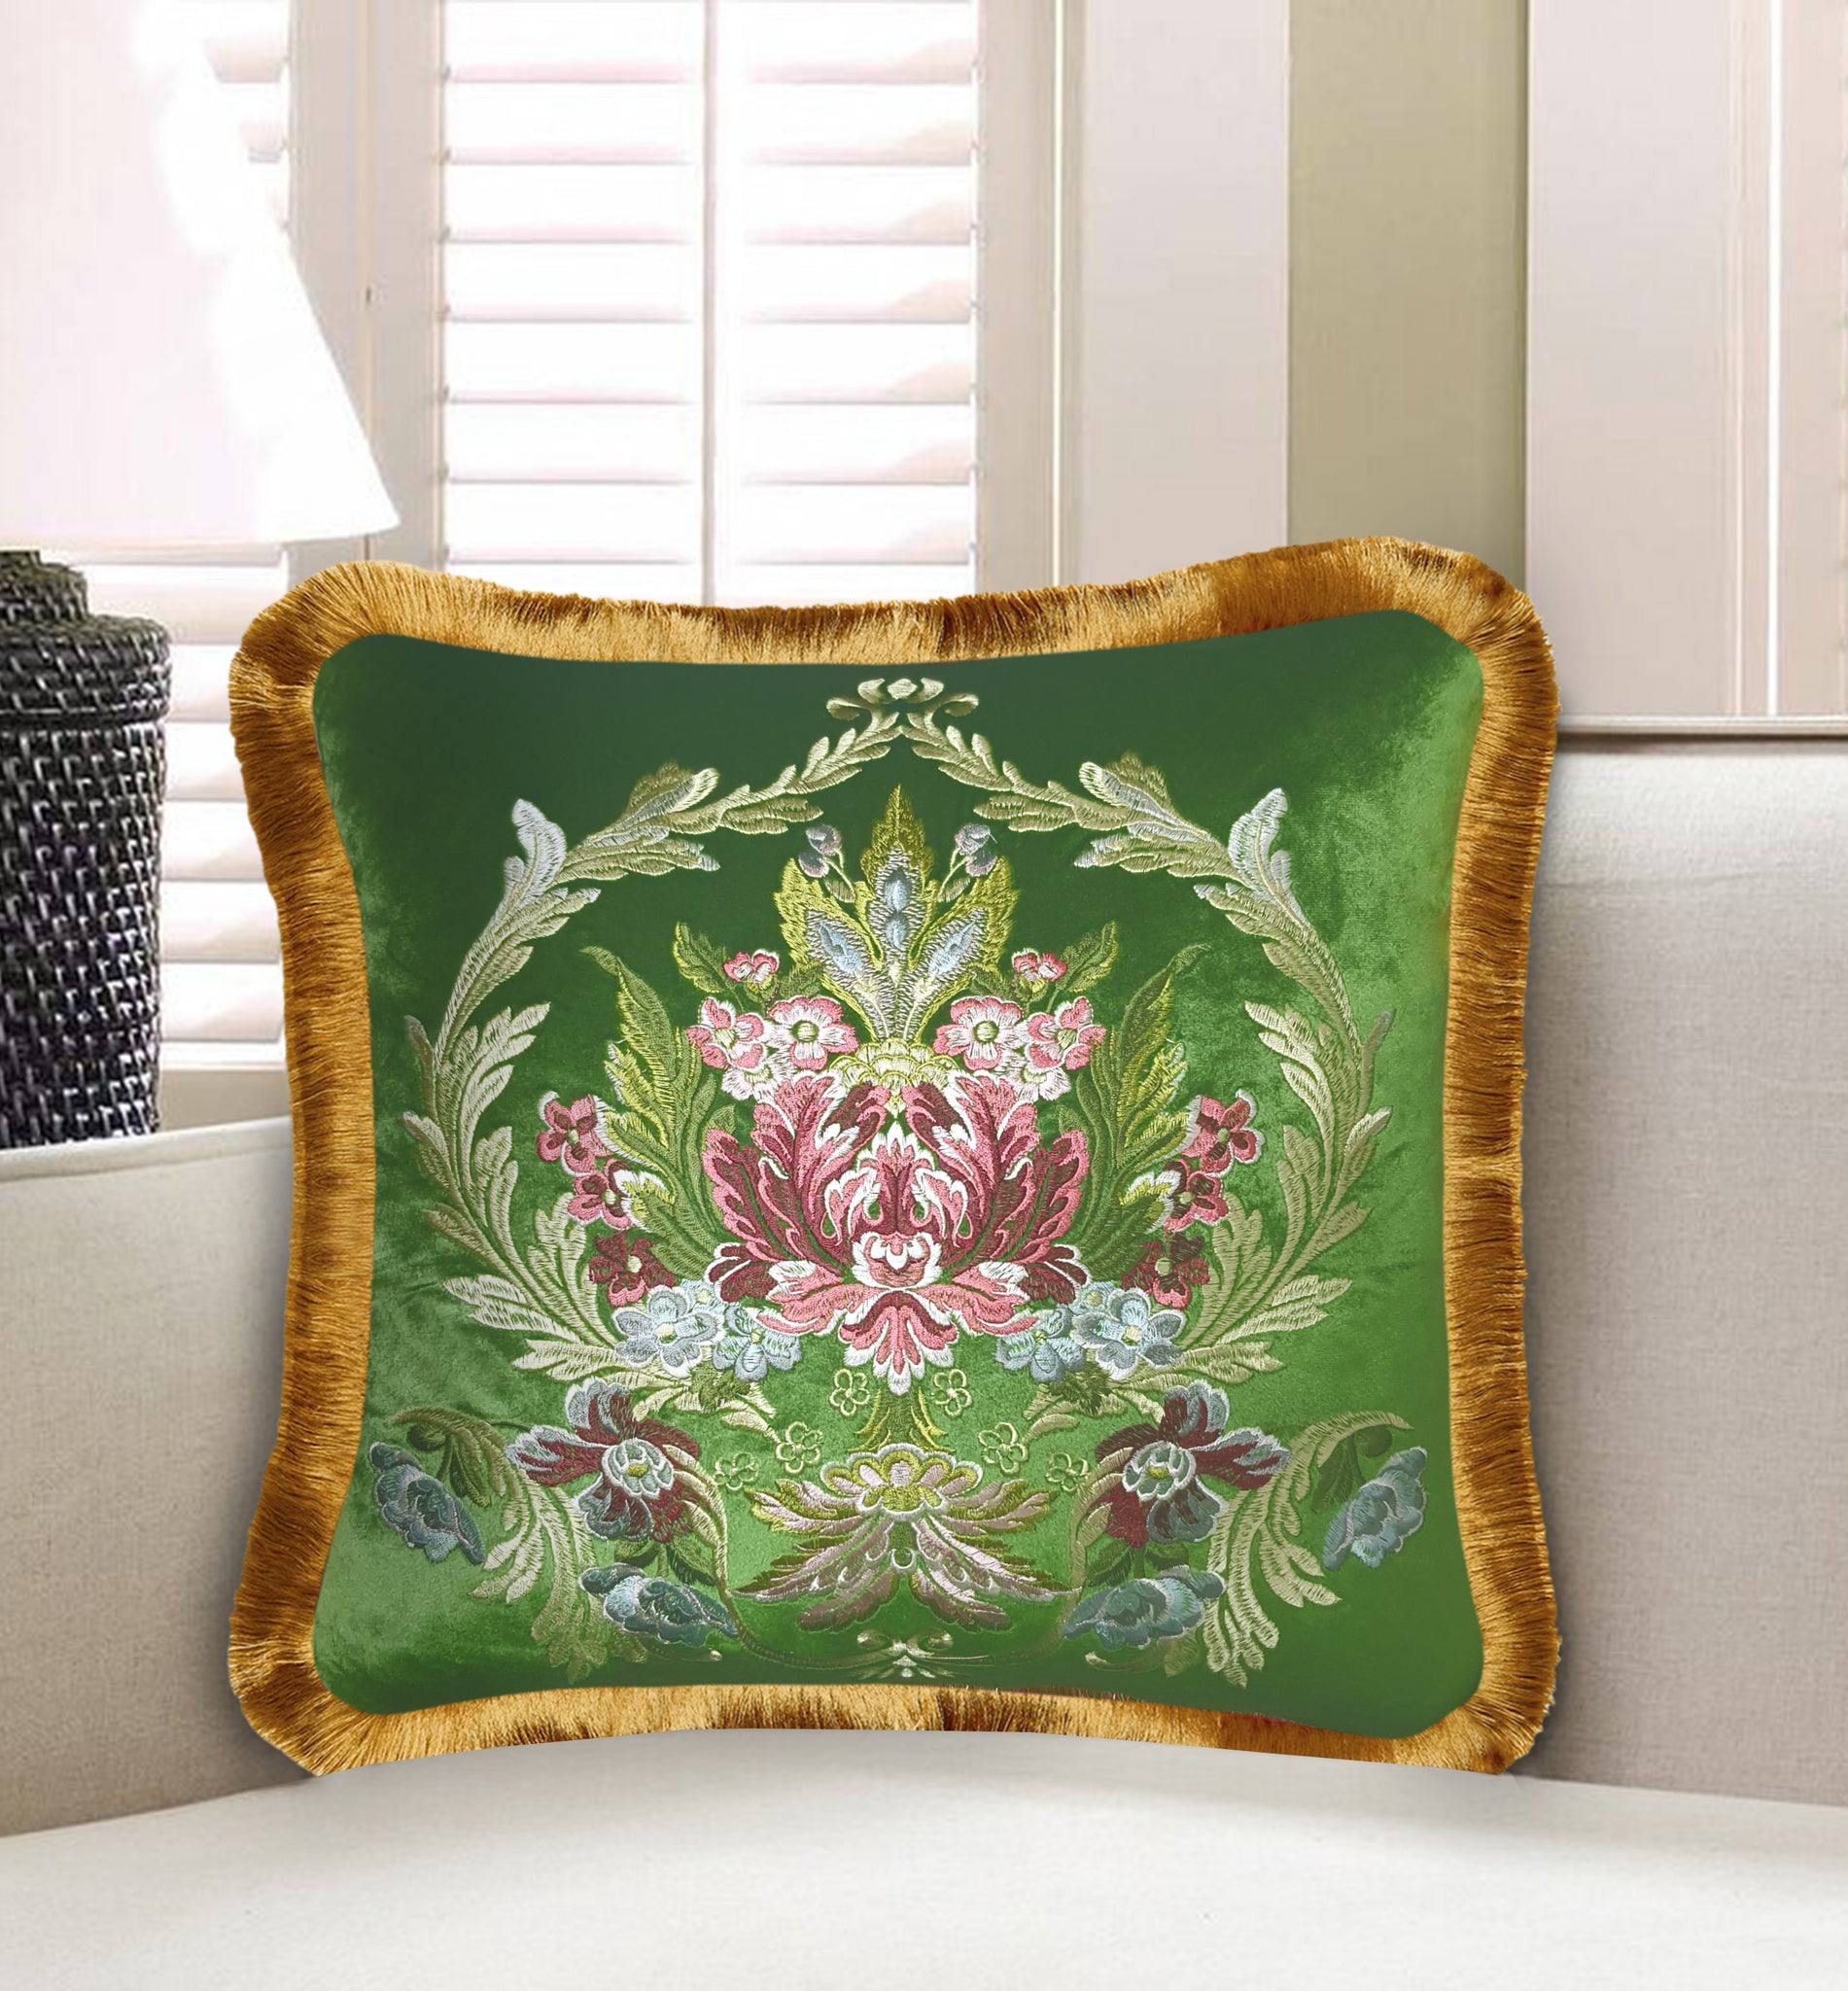 Velvet Cushion Cover Baroque Style Floral Embroidery Decorative Pillow Home Decor Throw Pillow for Sofa Chair Living Room 45x45 cm 18x18 In